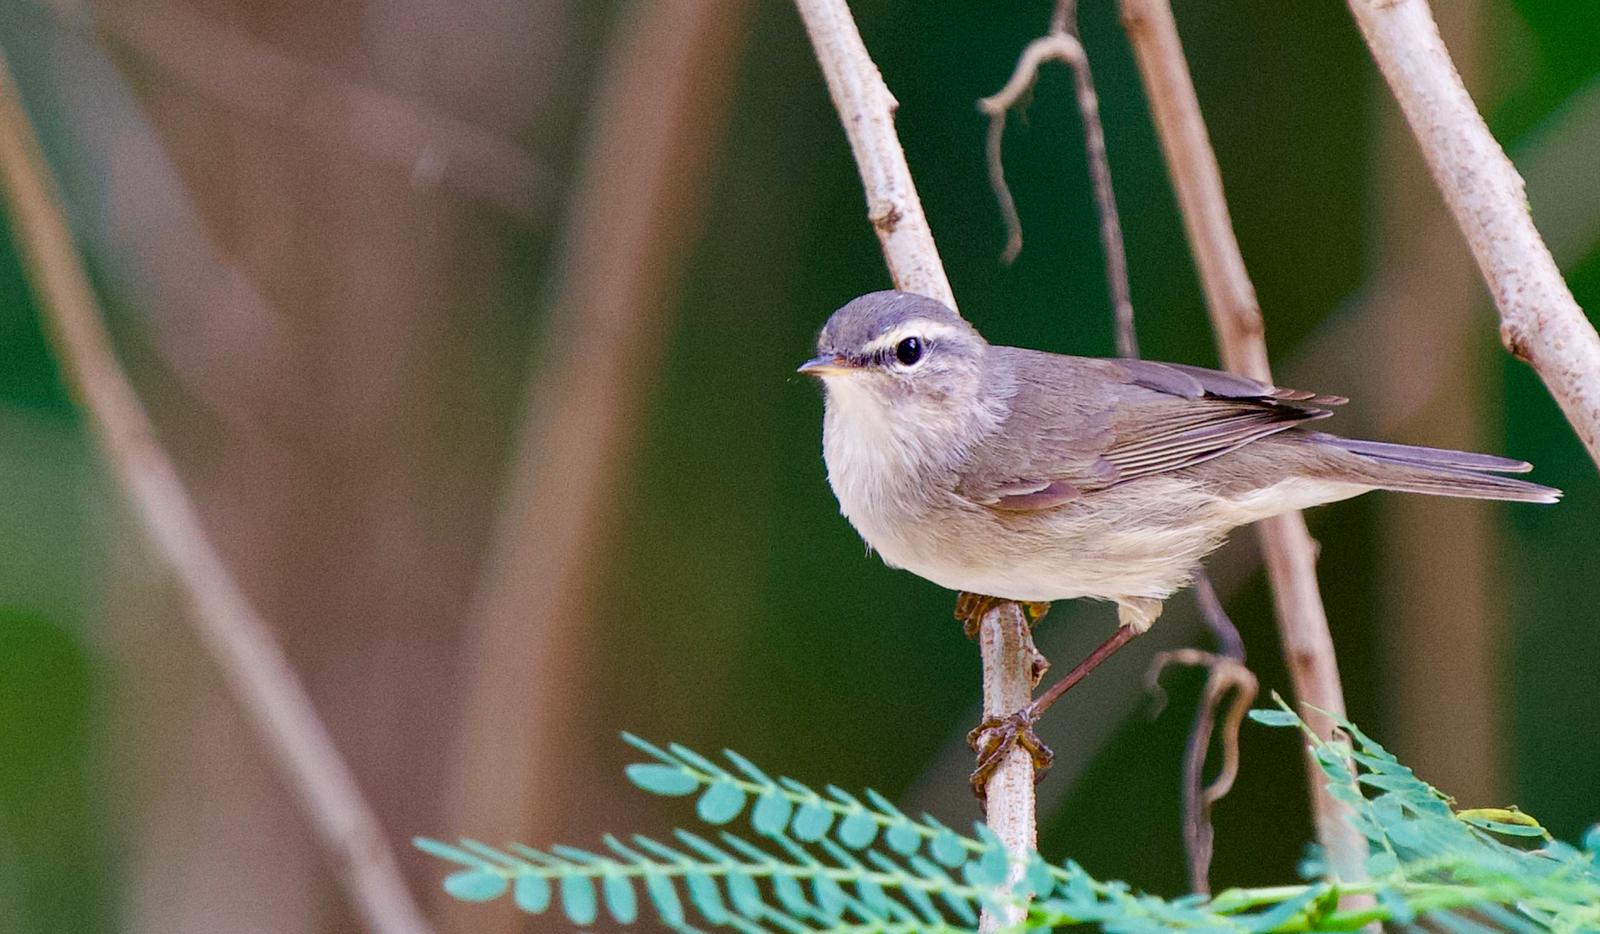 Dusky Warbler at Changi Business Park canal on 10 Mar 2022. Photo credit: T.Ramesh